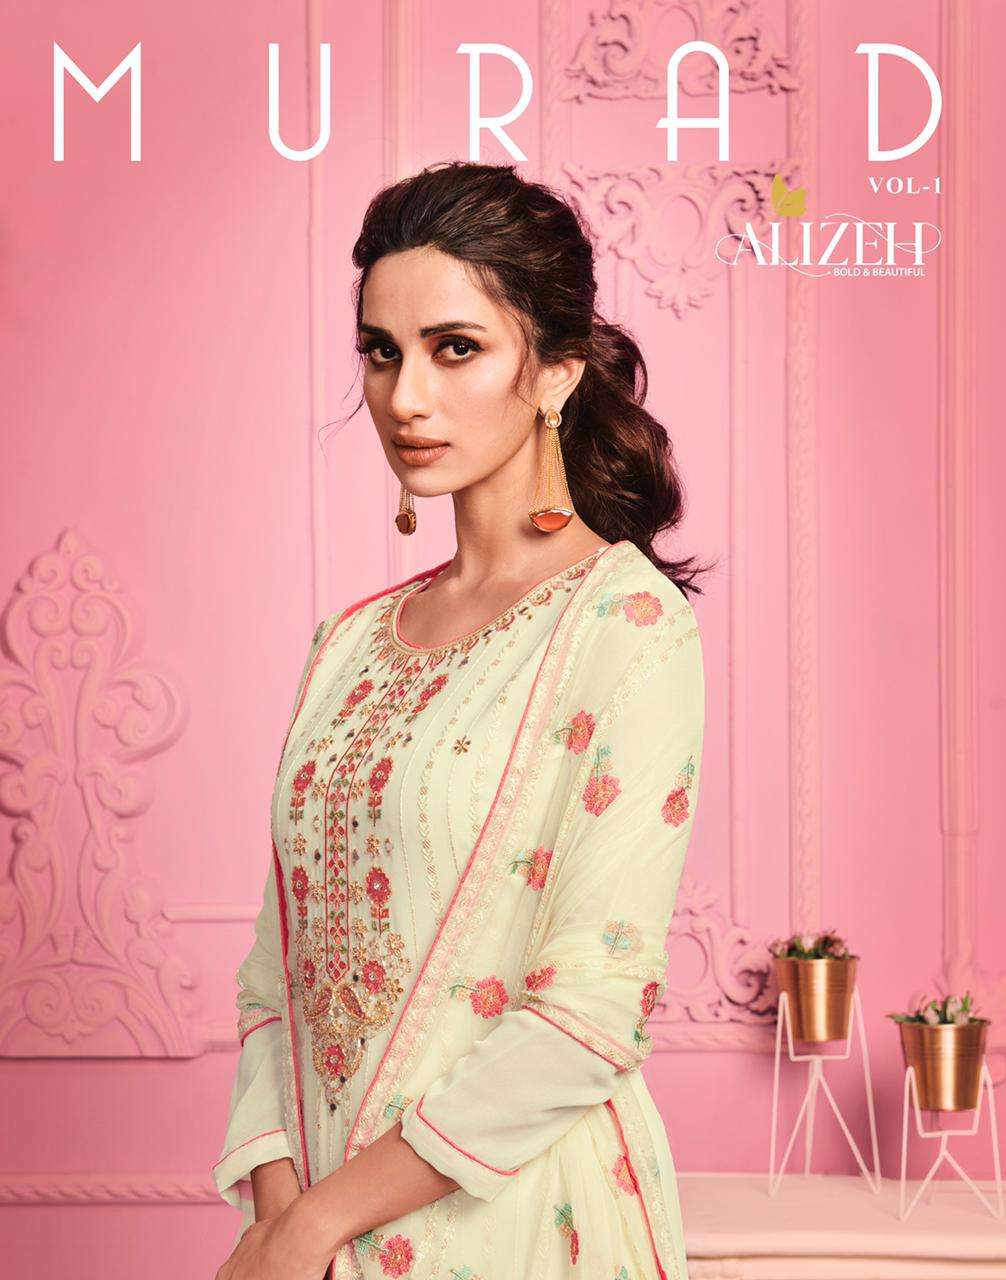 Alizeh Murad Vol 1 Georgette With Thread Embroidery Work Dress Material Collection